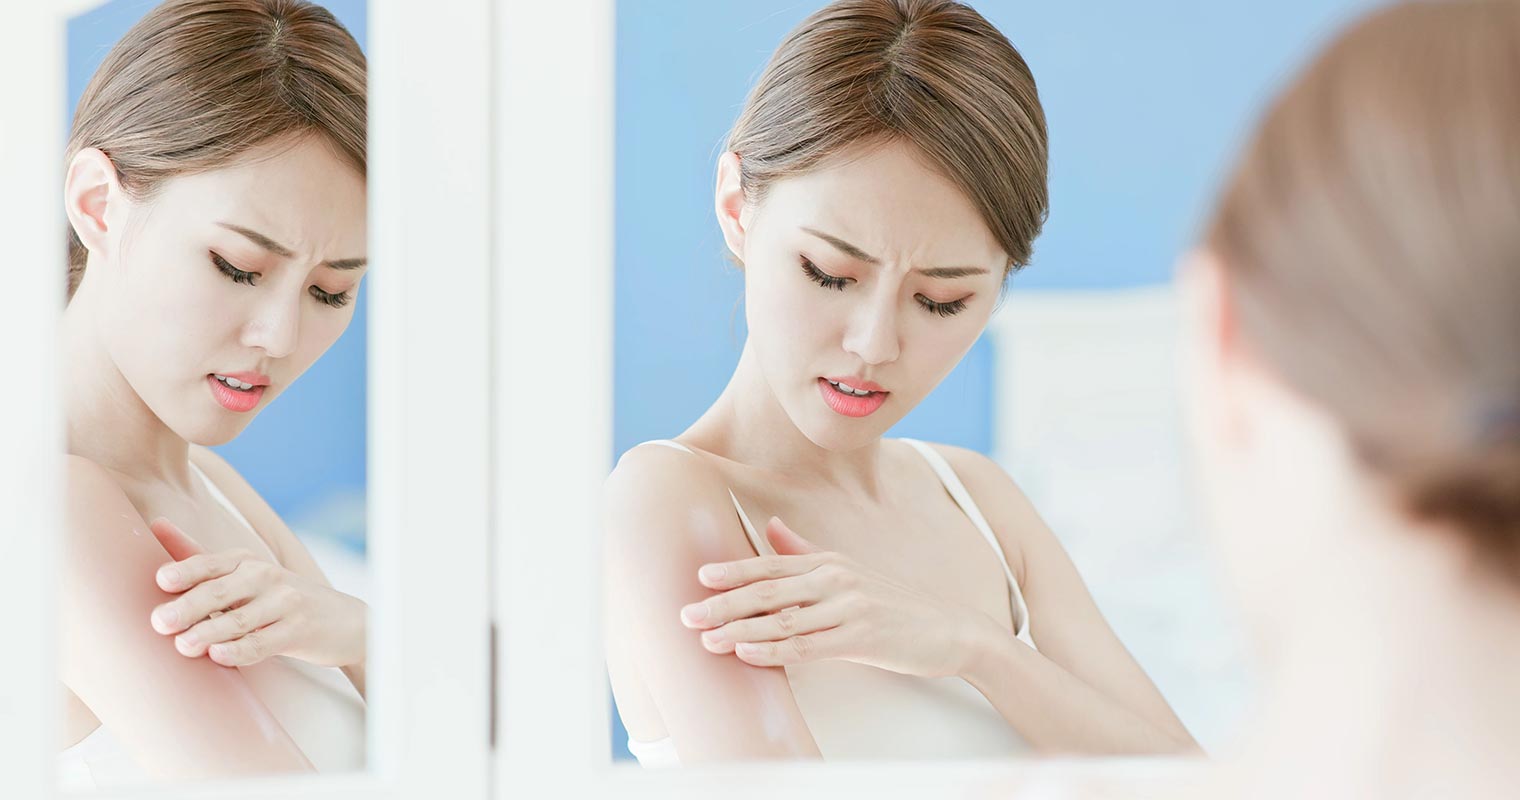 Can probiotics help to heal skin conditions such as eczema, psoriasis and rosacea?